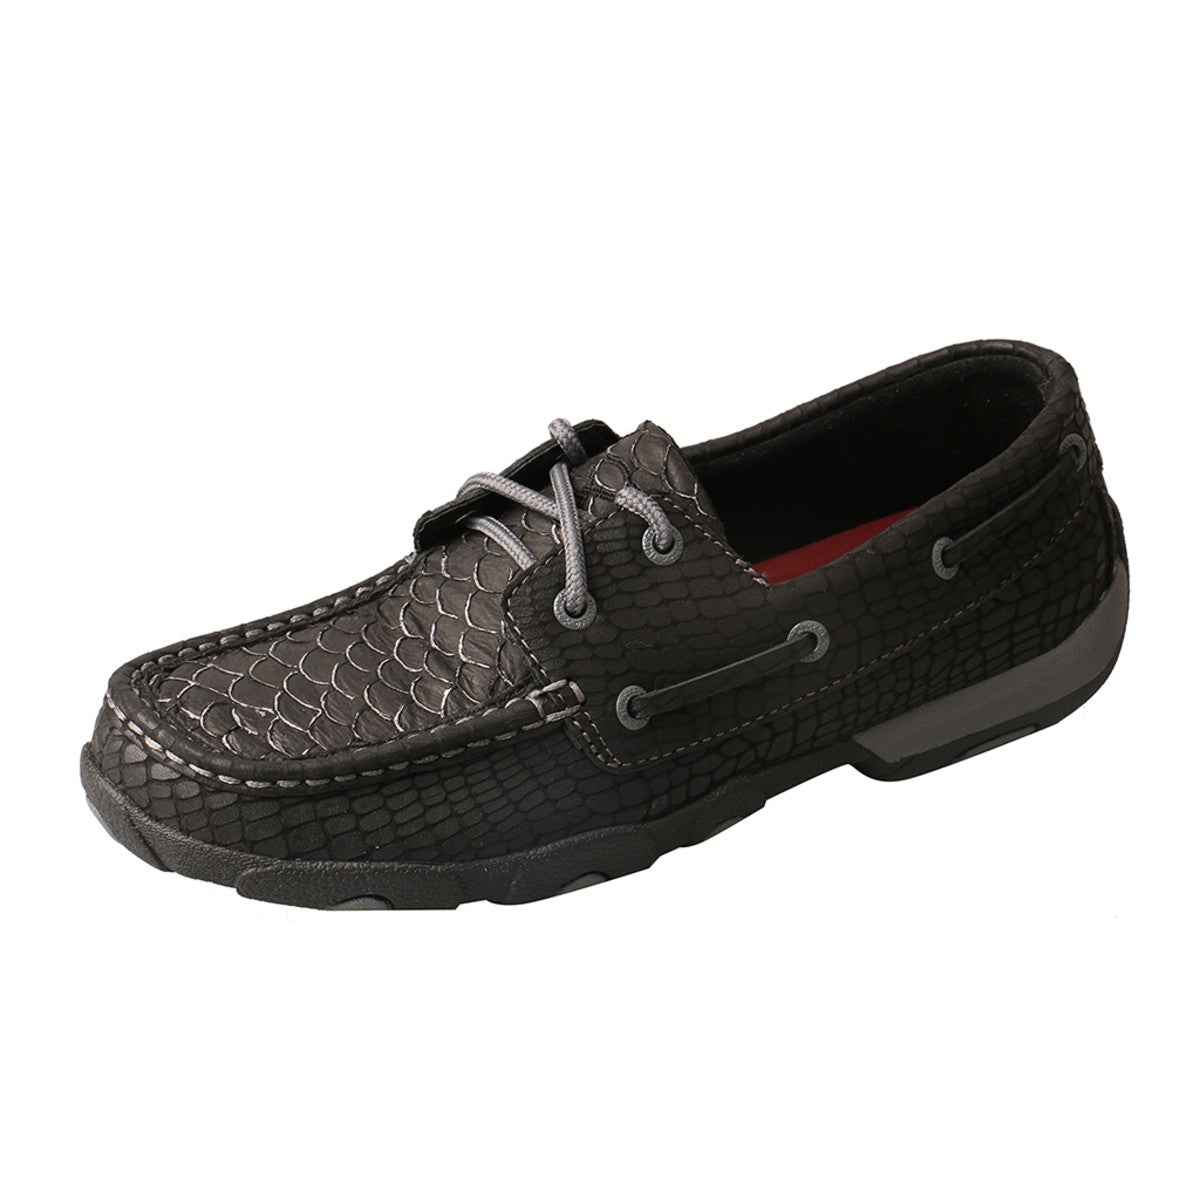 Women's Twisted X Boat Shoe Driving Moccasins in Black Fish & Grey from the side view